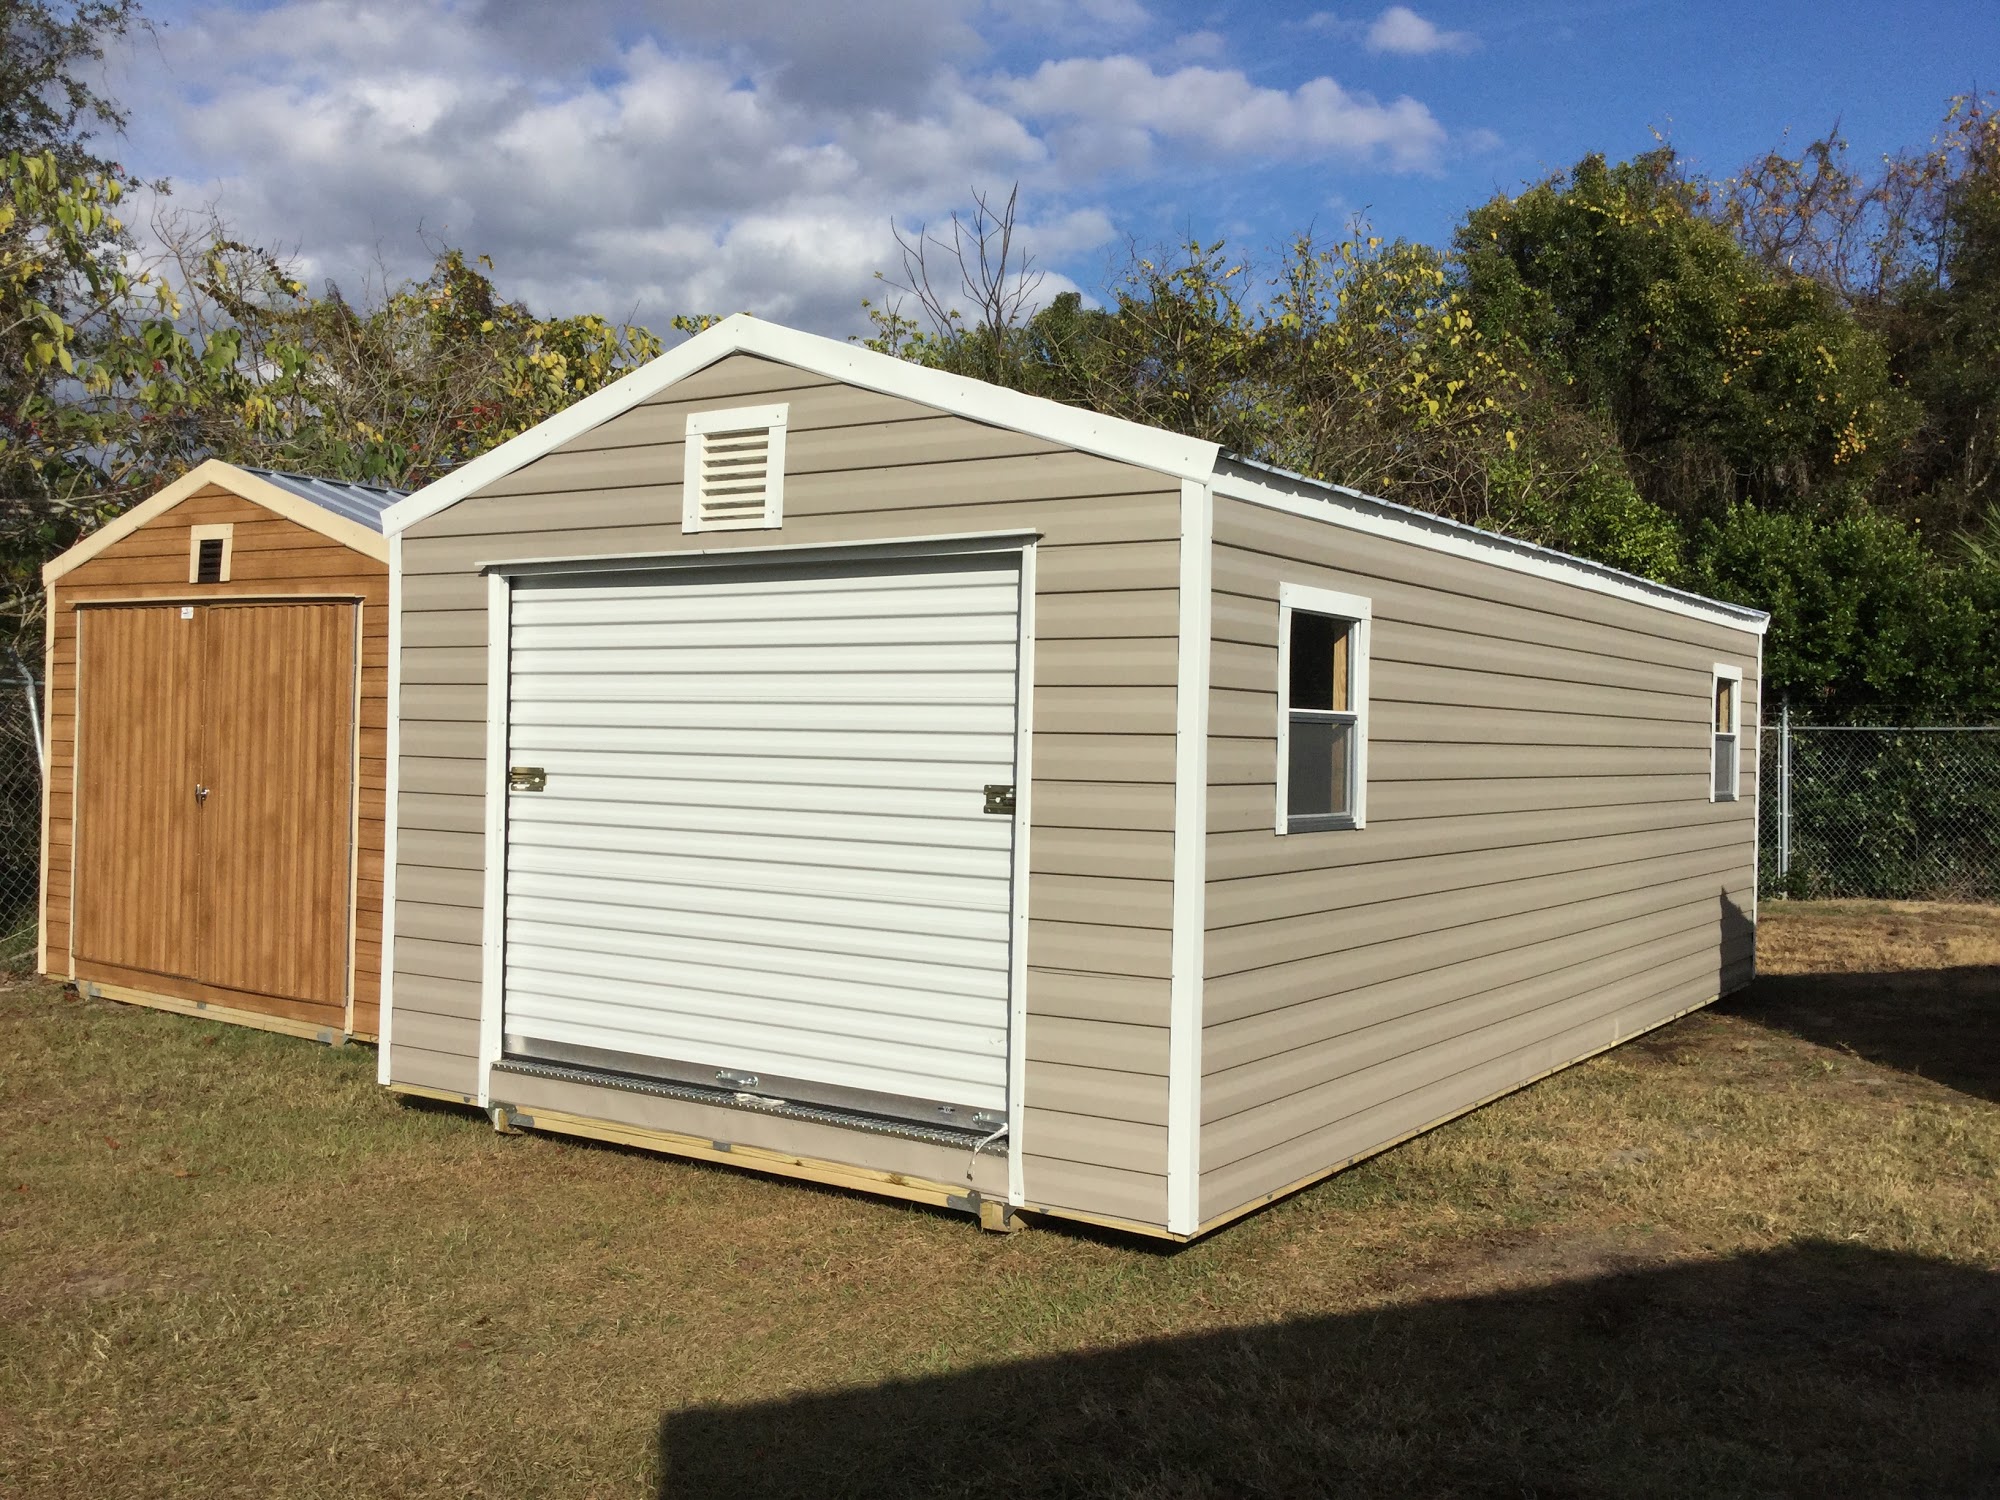 Empire Sheds and More, LLC